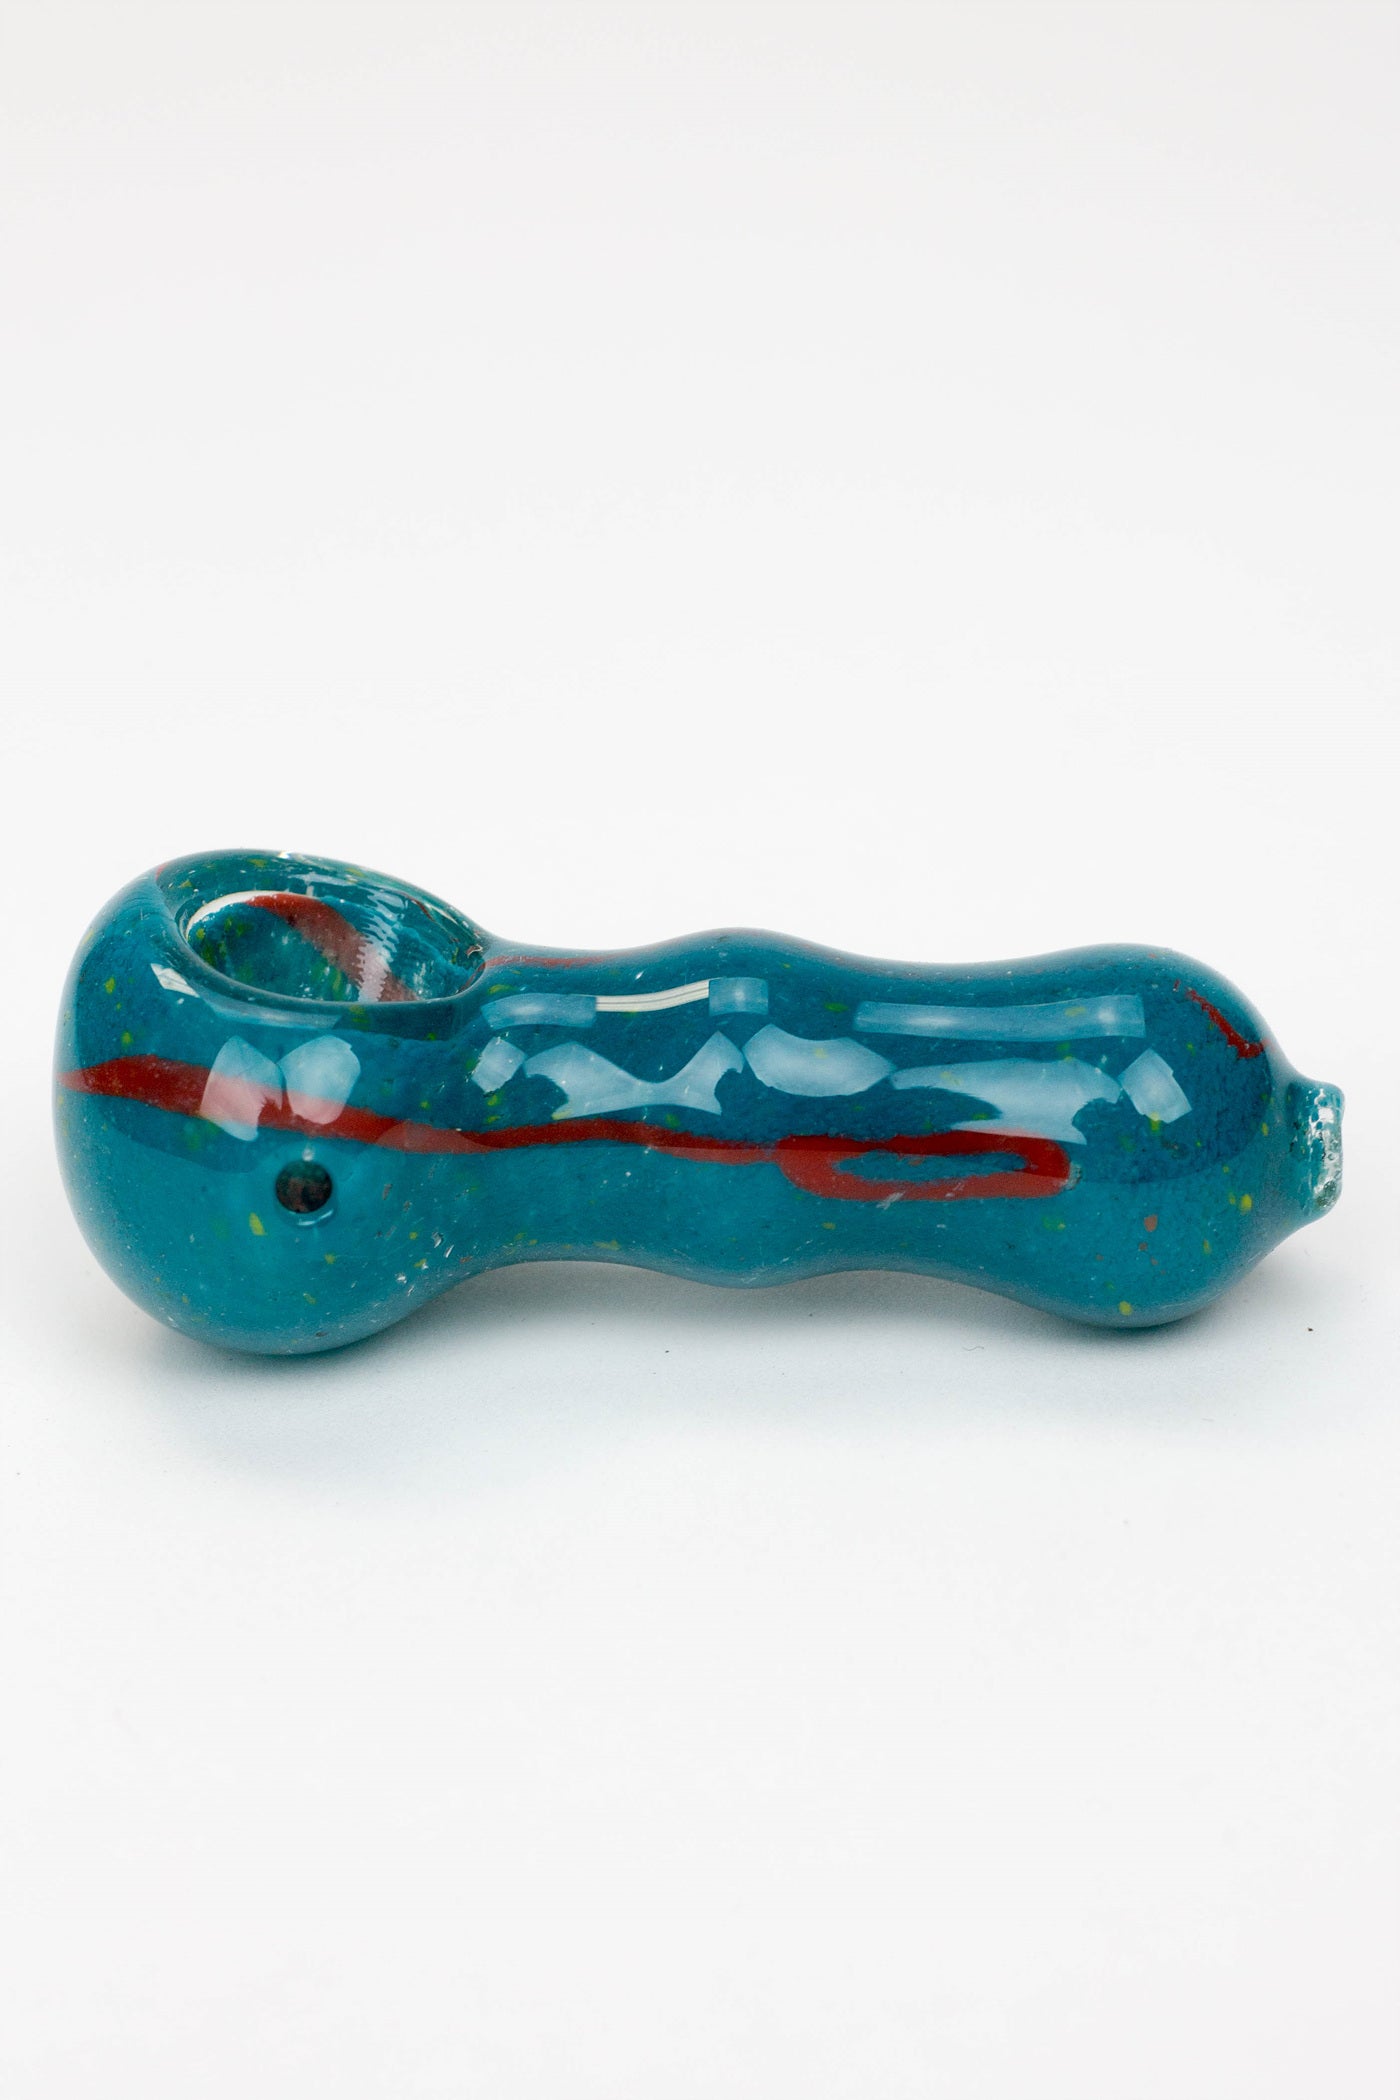 3" Soft glass 8550 hand pipe_4